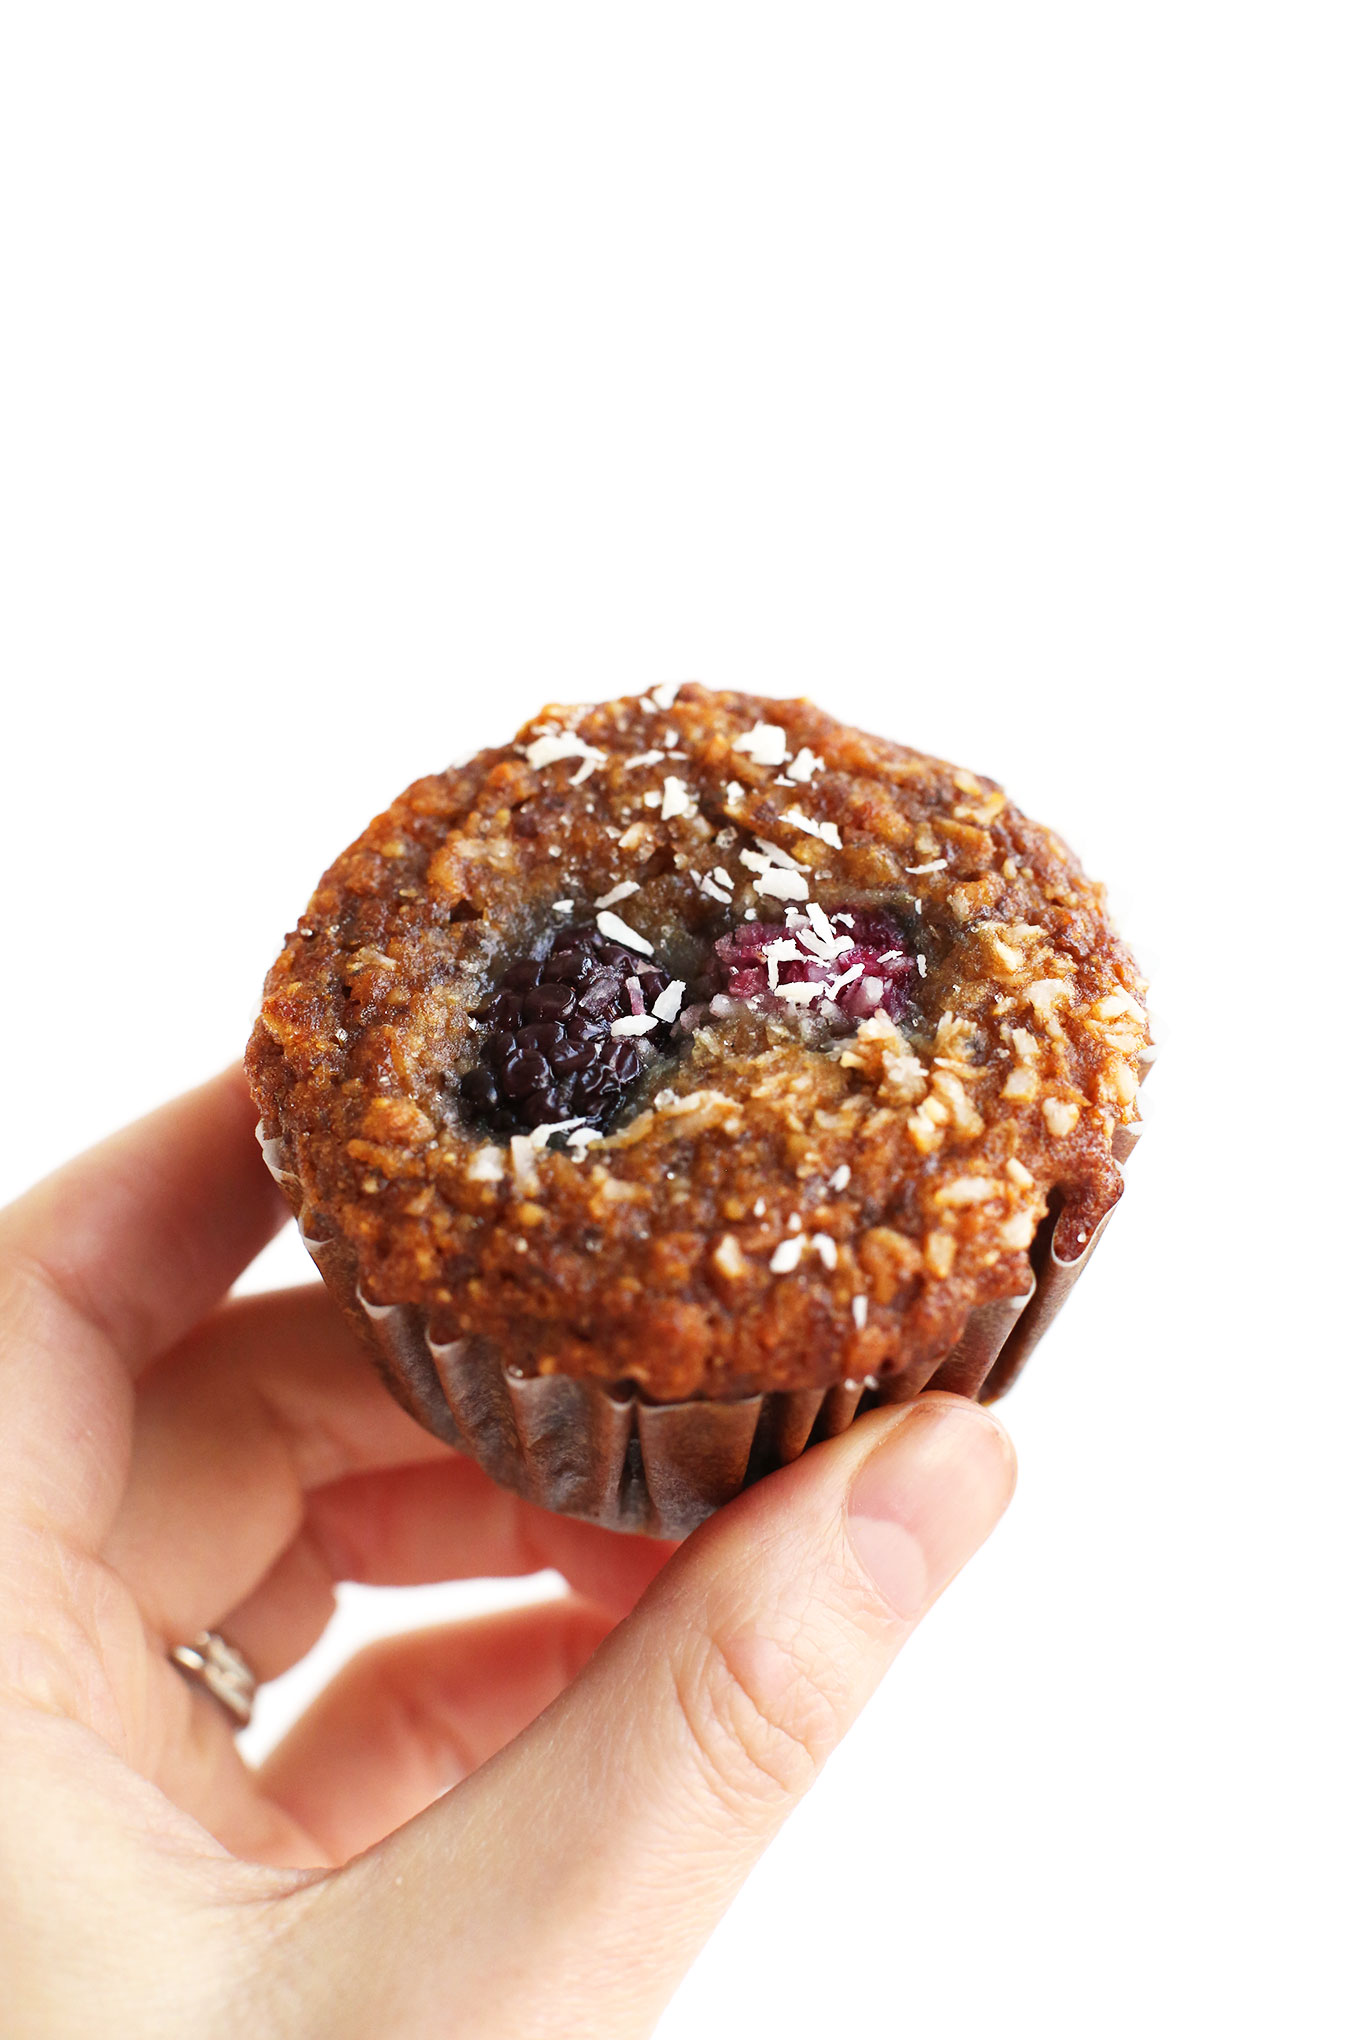 Holding up a delicious gluten-free vegan Berry Coconut Muffin